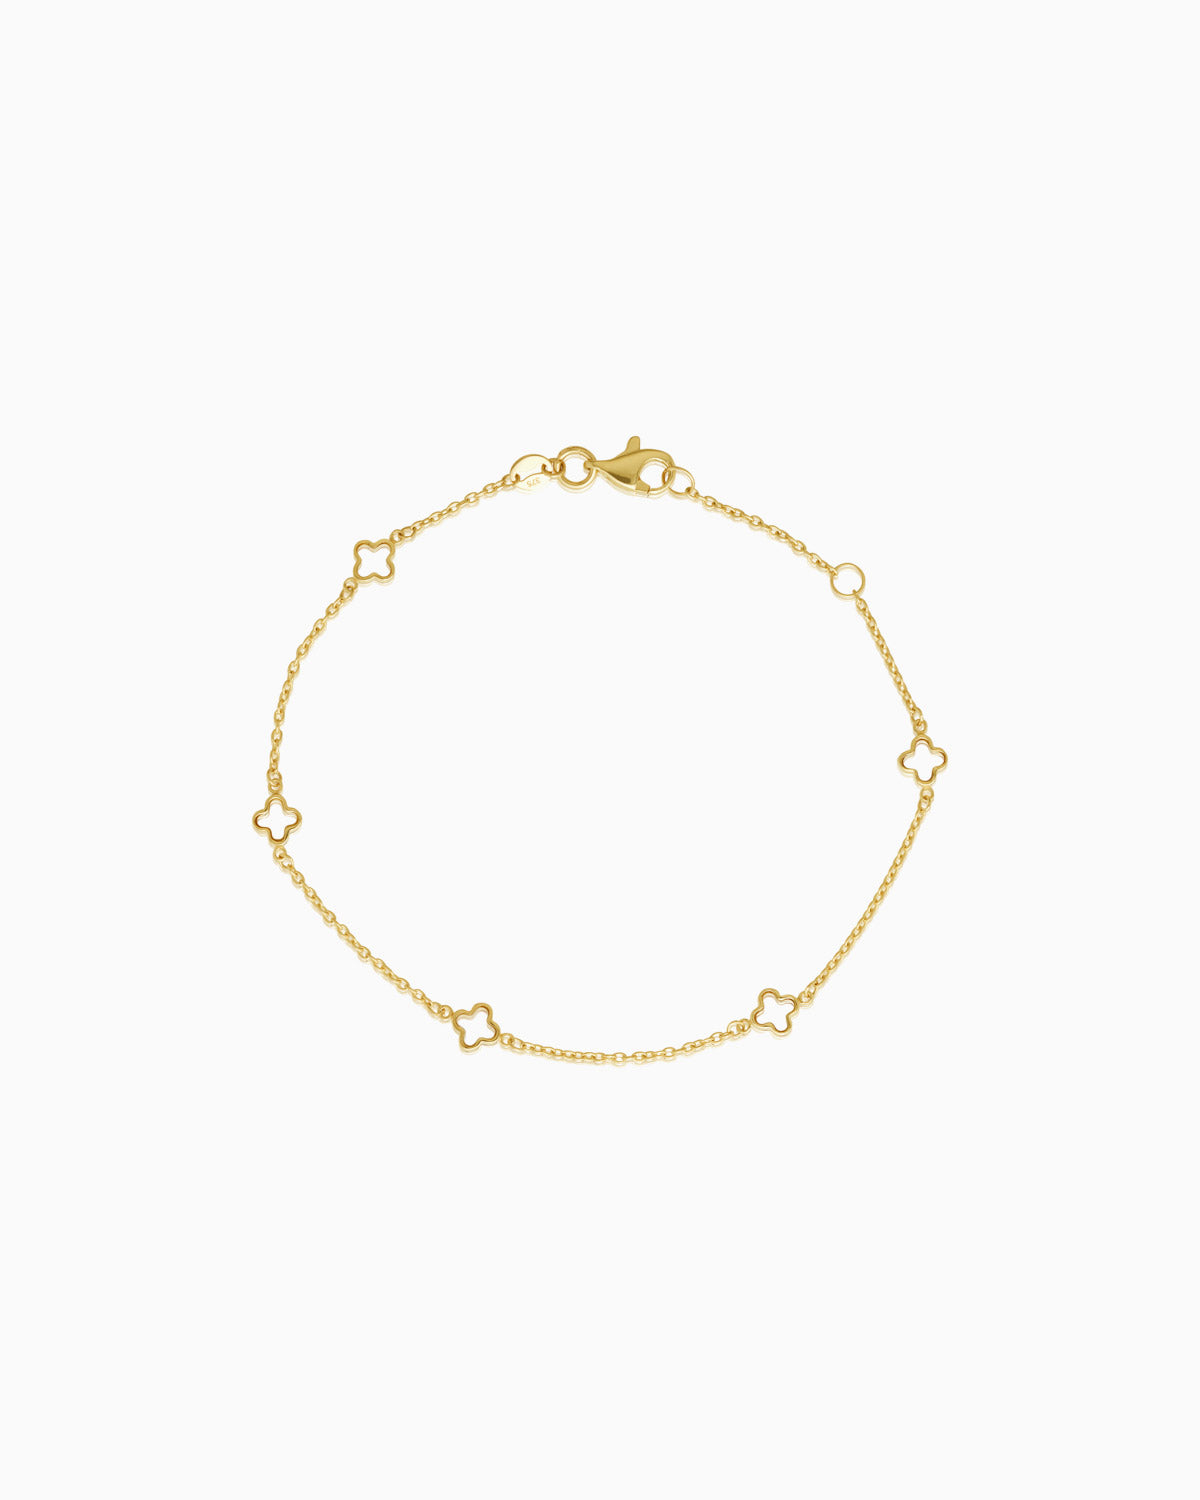 fine mother of pearl clover bracelet from the claude by claudia fine jewellery collection.